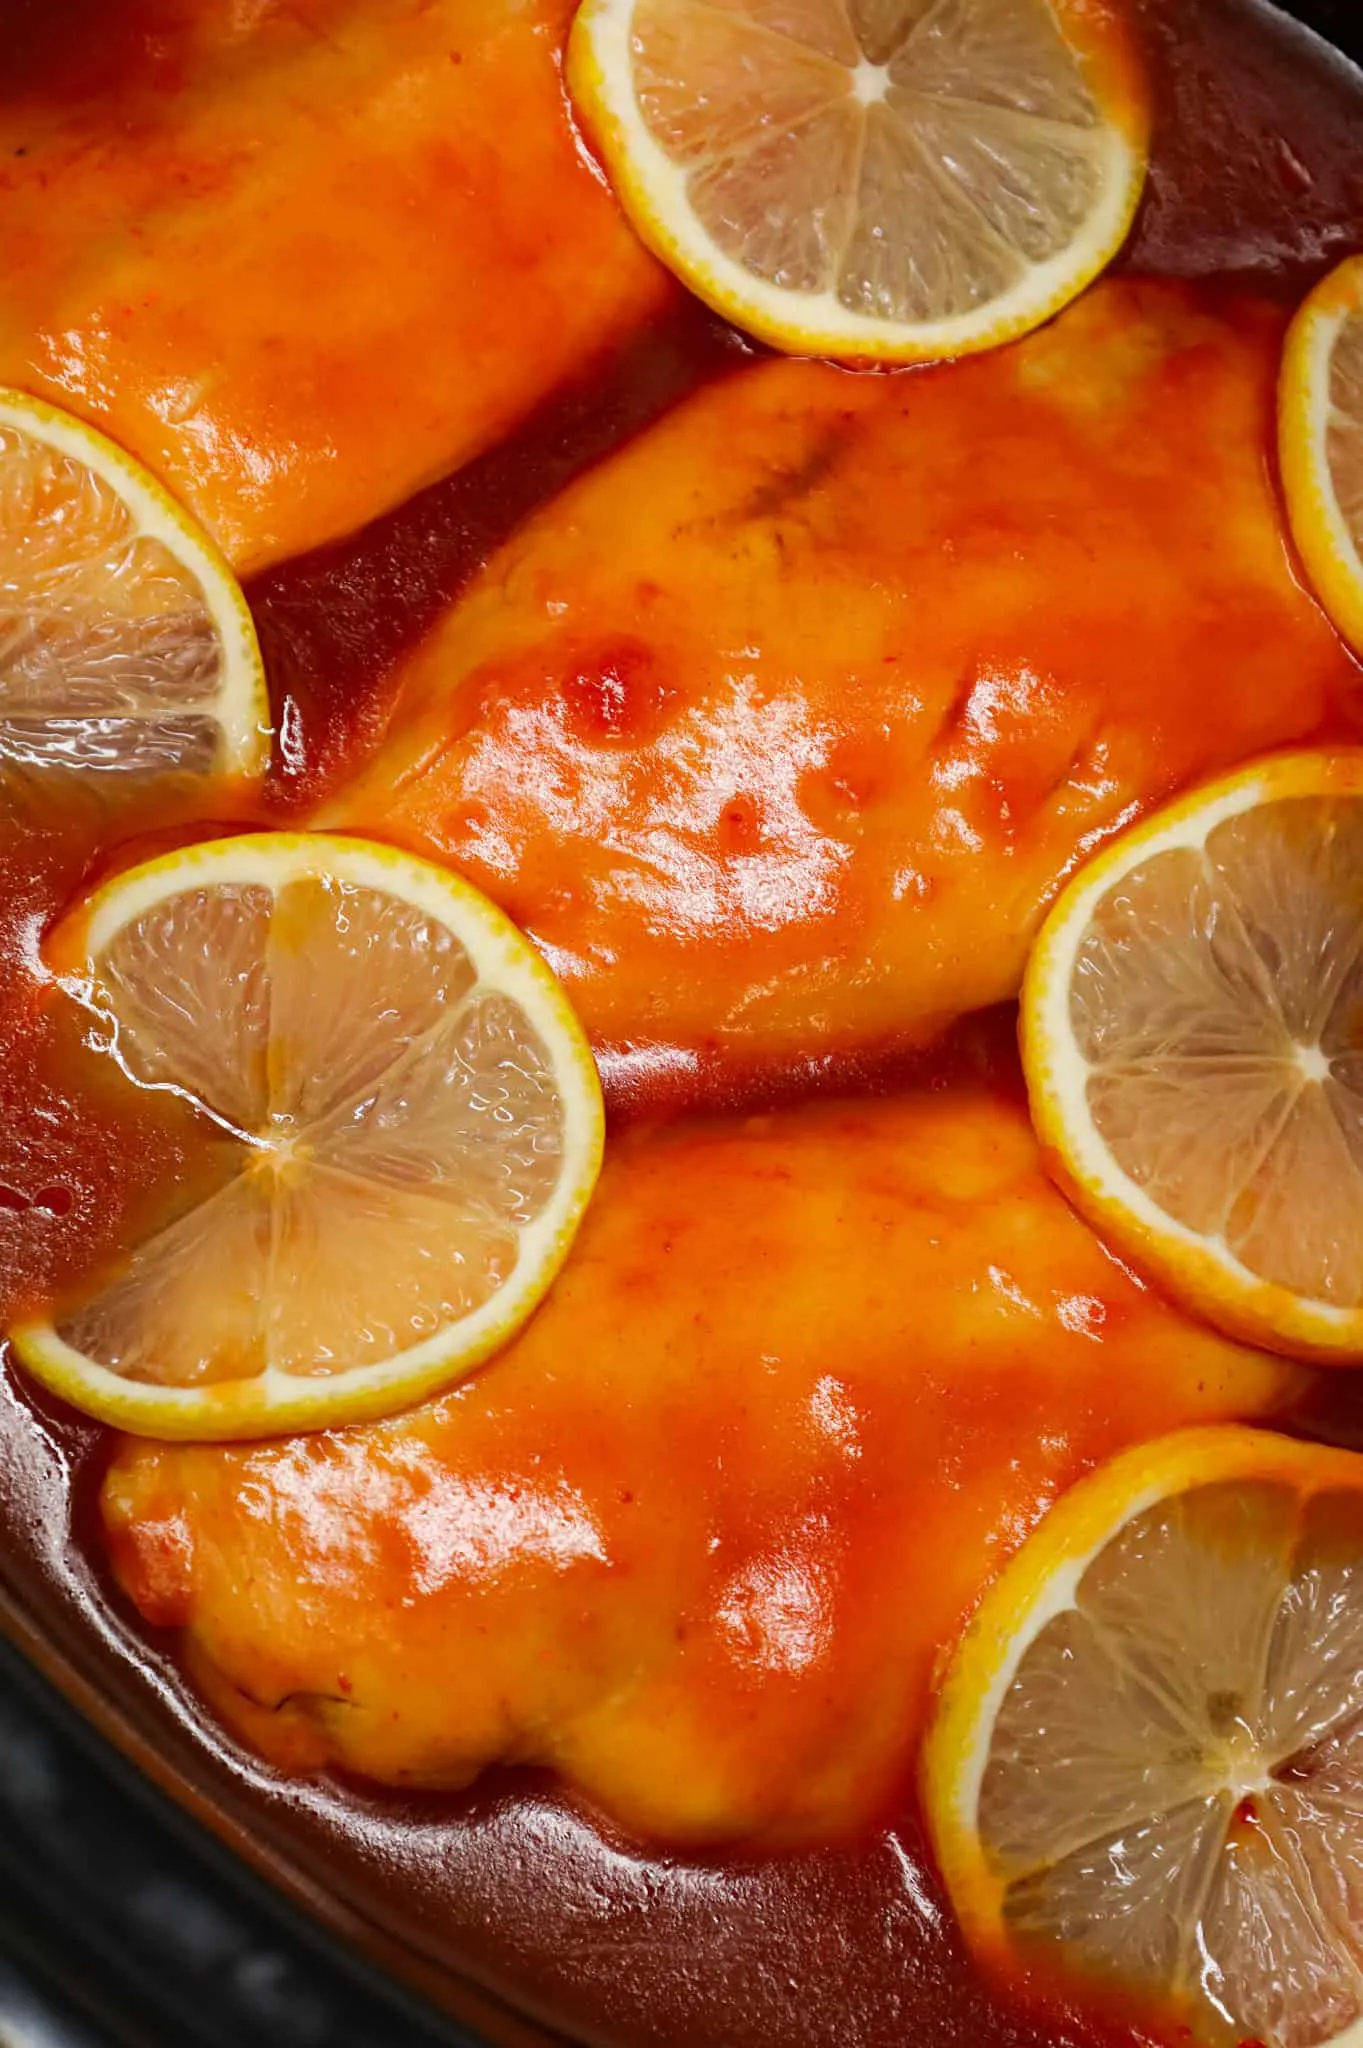 Crock Pot Lemonade Chicken is an easy slow cooker chicken breast recipe made with frozen lemonade concentrate, ketchup, brown sugar, Worcestershire sauce and cornstarch.